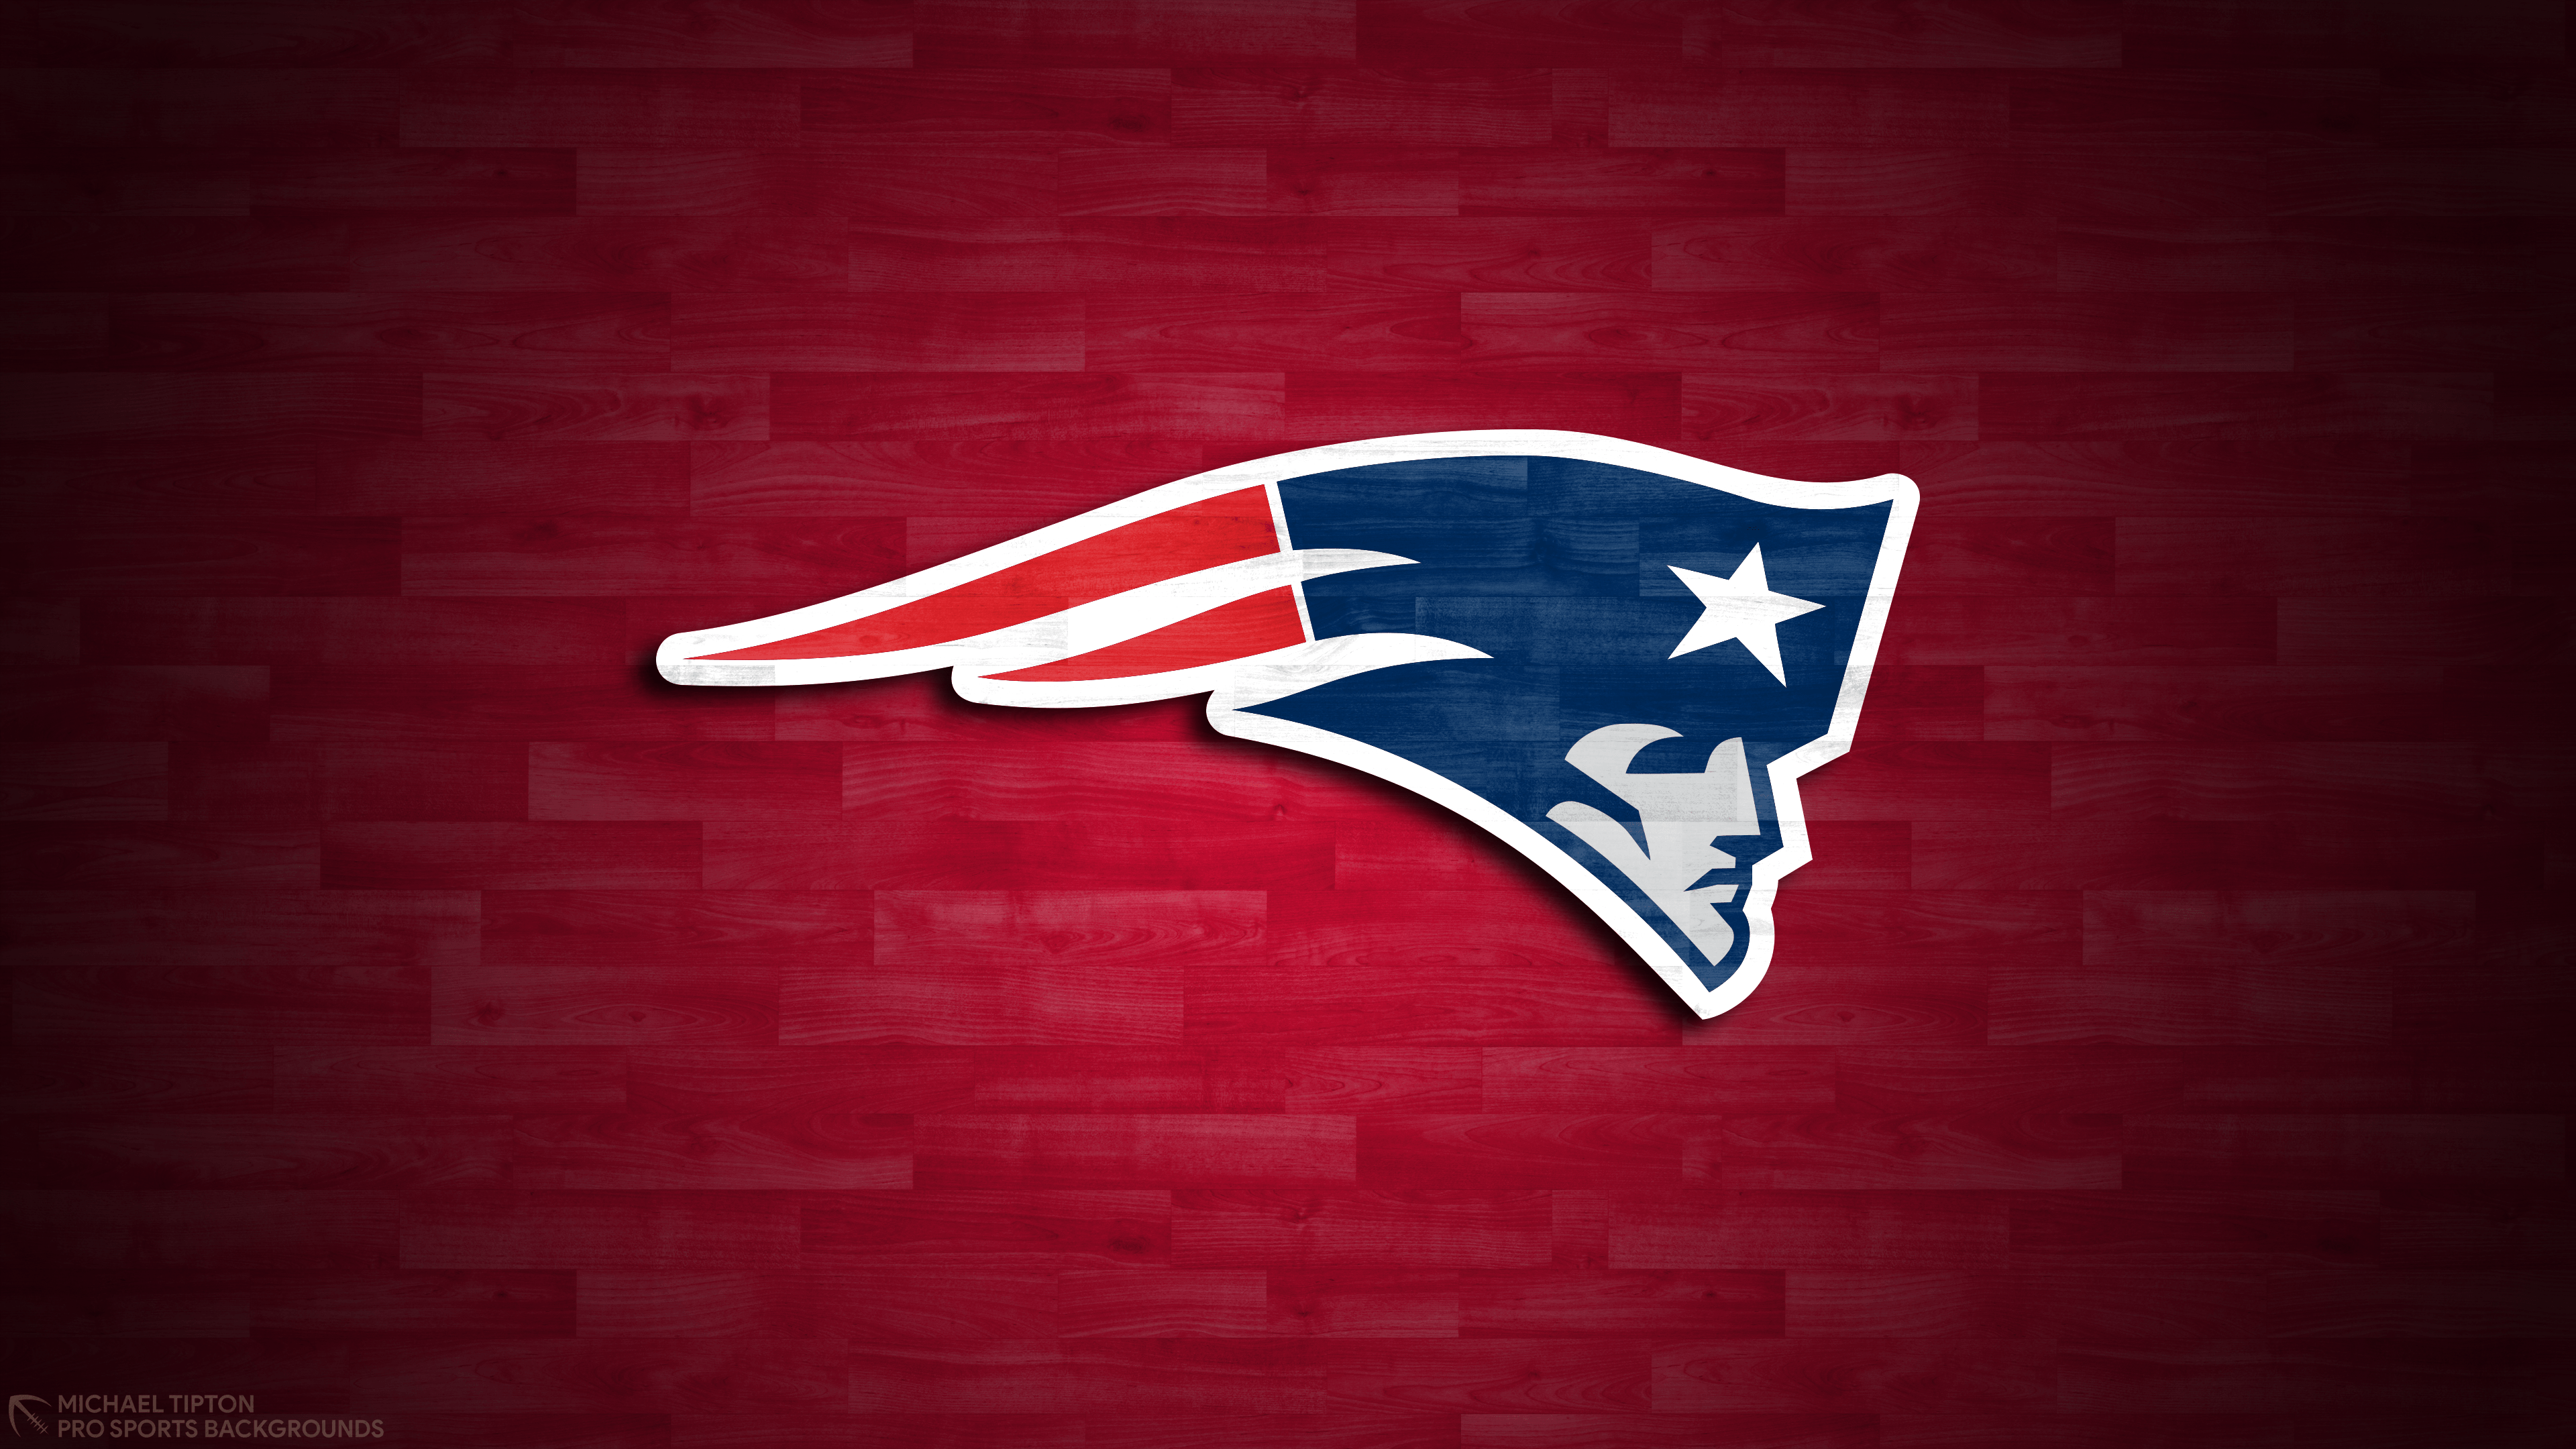 Made a New England Patriots Mobile Wallpaper, Tell Me What You